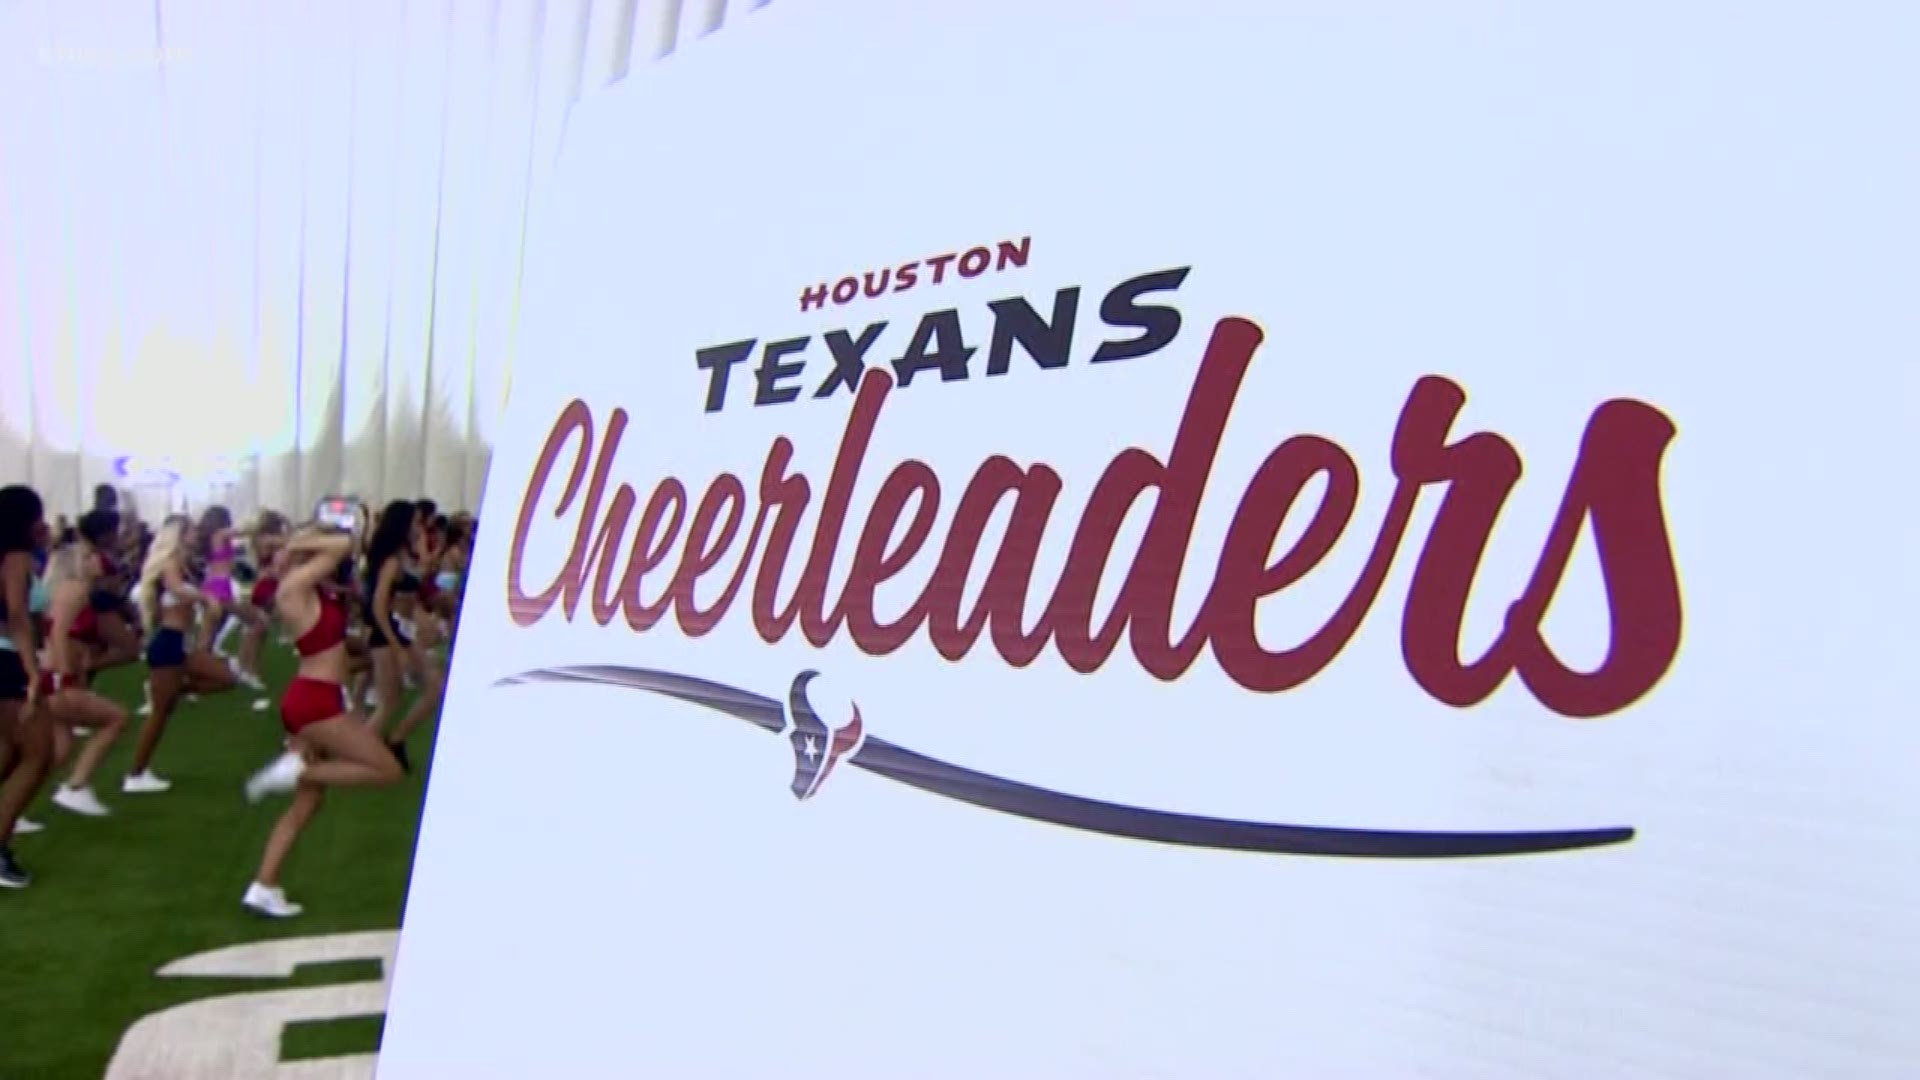 It was a big day for hundreds of young women and a few men as they tried out for the Texans cheerleading squad